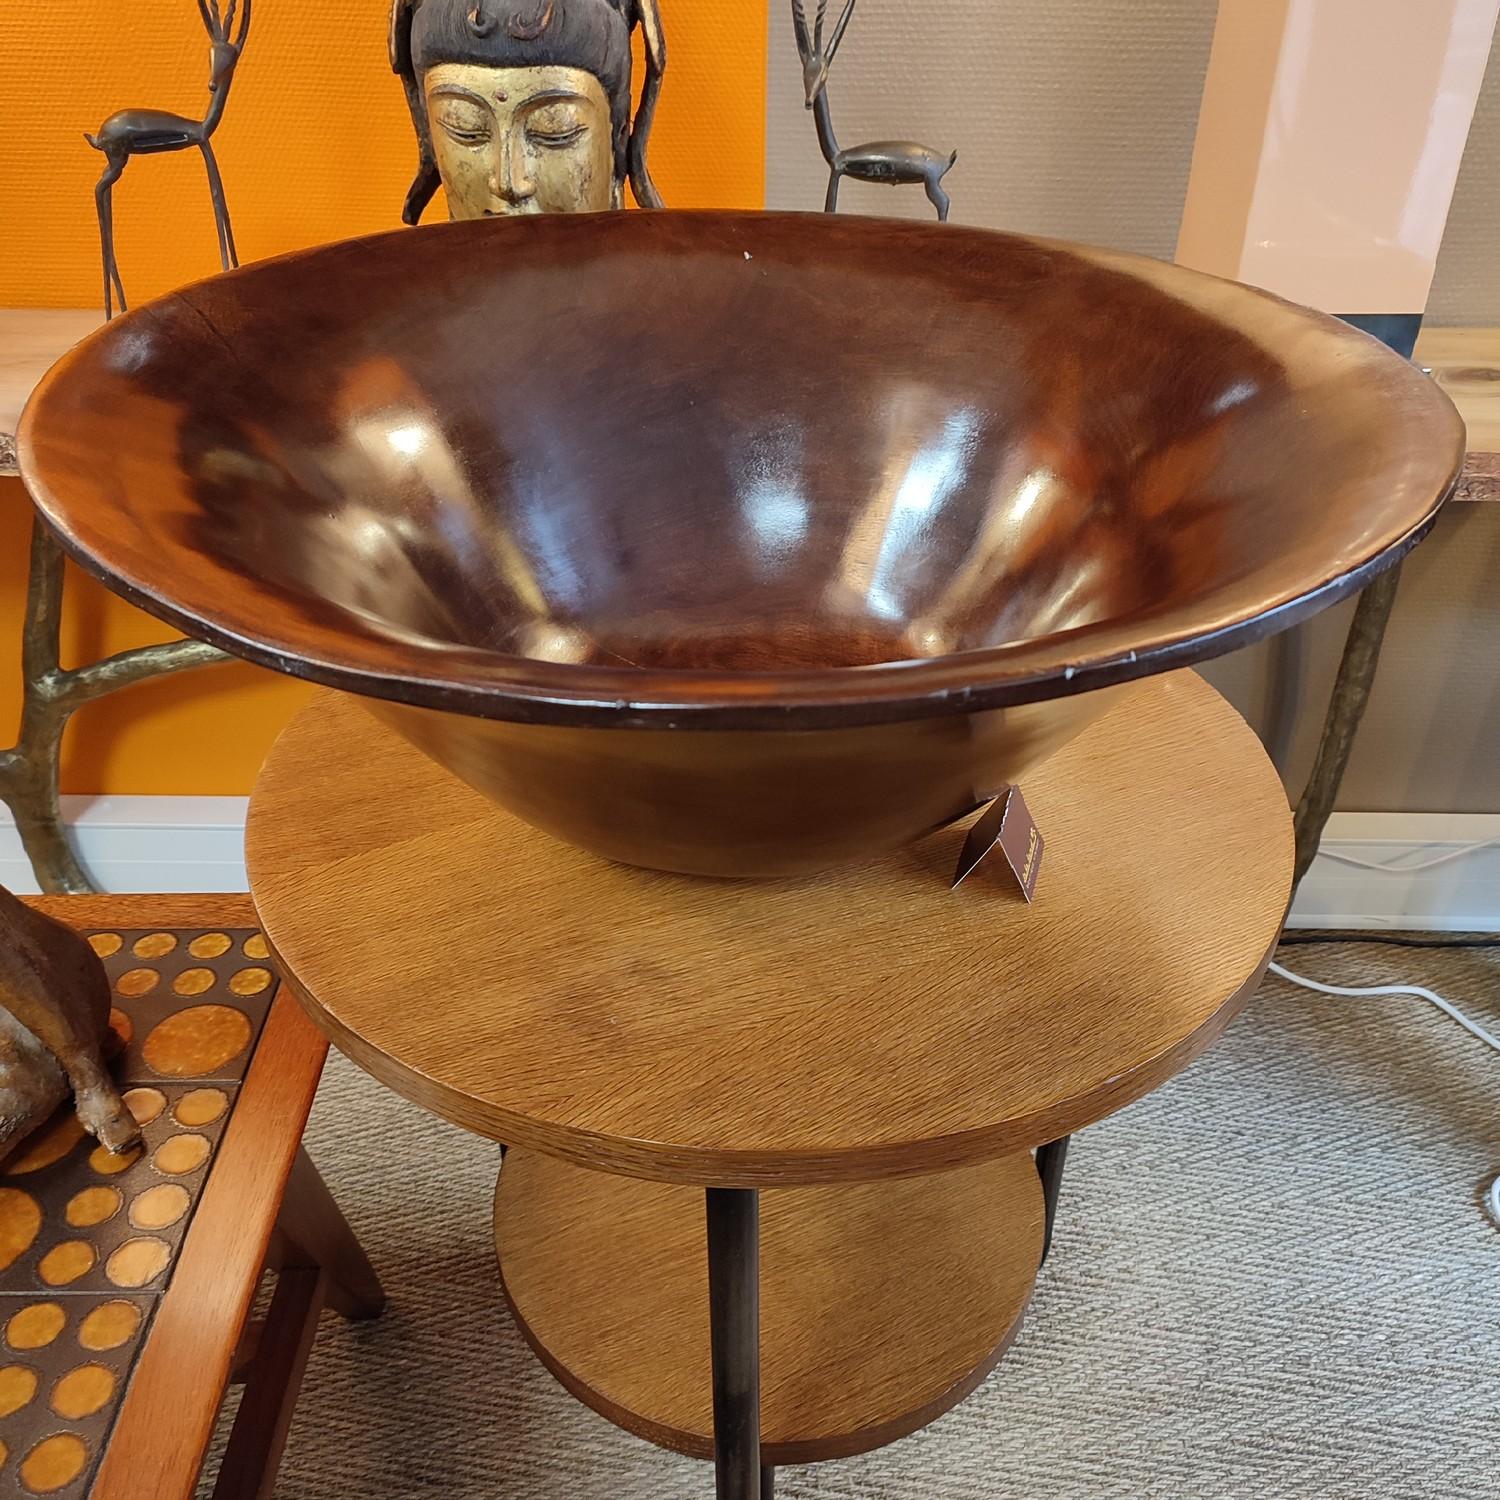 Beautiful large african bowl, made out of one piece, perfect to display magazines or towels in a bathroom. Great patina and condition.

Do not hesitate to contact me for a shipping quote.